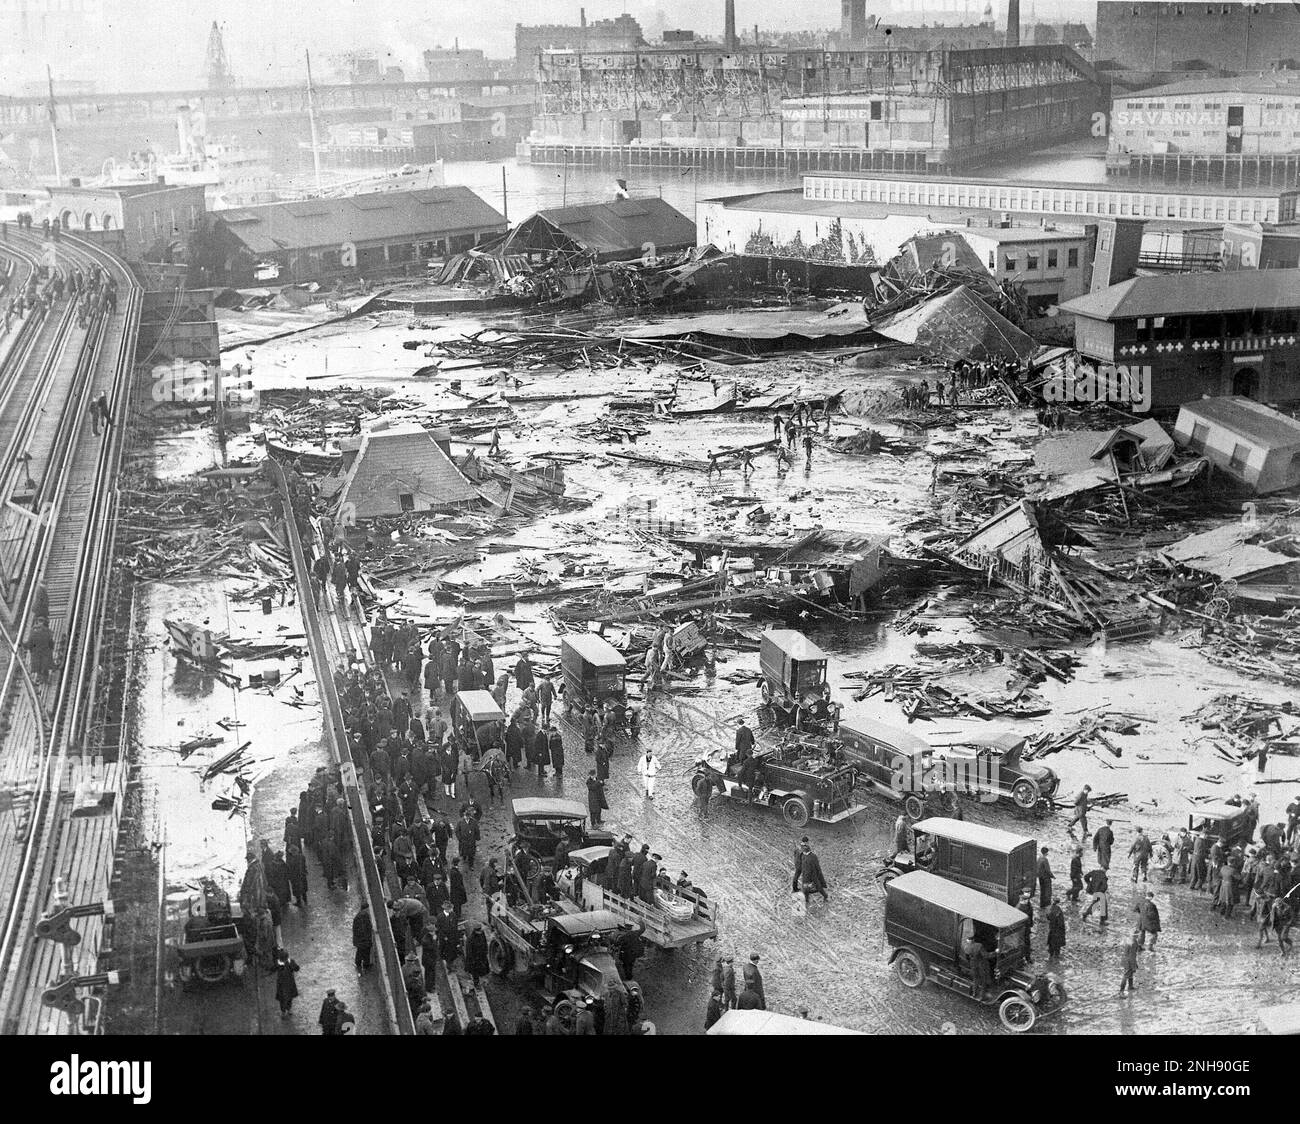 The Great Molasses Flood or the Boston Molasses Disaster, January 15th, 1919. Twenty one people were killed and 150 injured on Commercial Street in Boston's North End when a tank containing 2.3 million gallons of molasses ruptured and exploded. An eight foot wave of liquid moved down Commercial Street at a speed of 35mph. Wreckage of the collapsed tank is visible in background, center, next to a light colored warehouse. Stock Photo